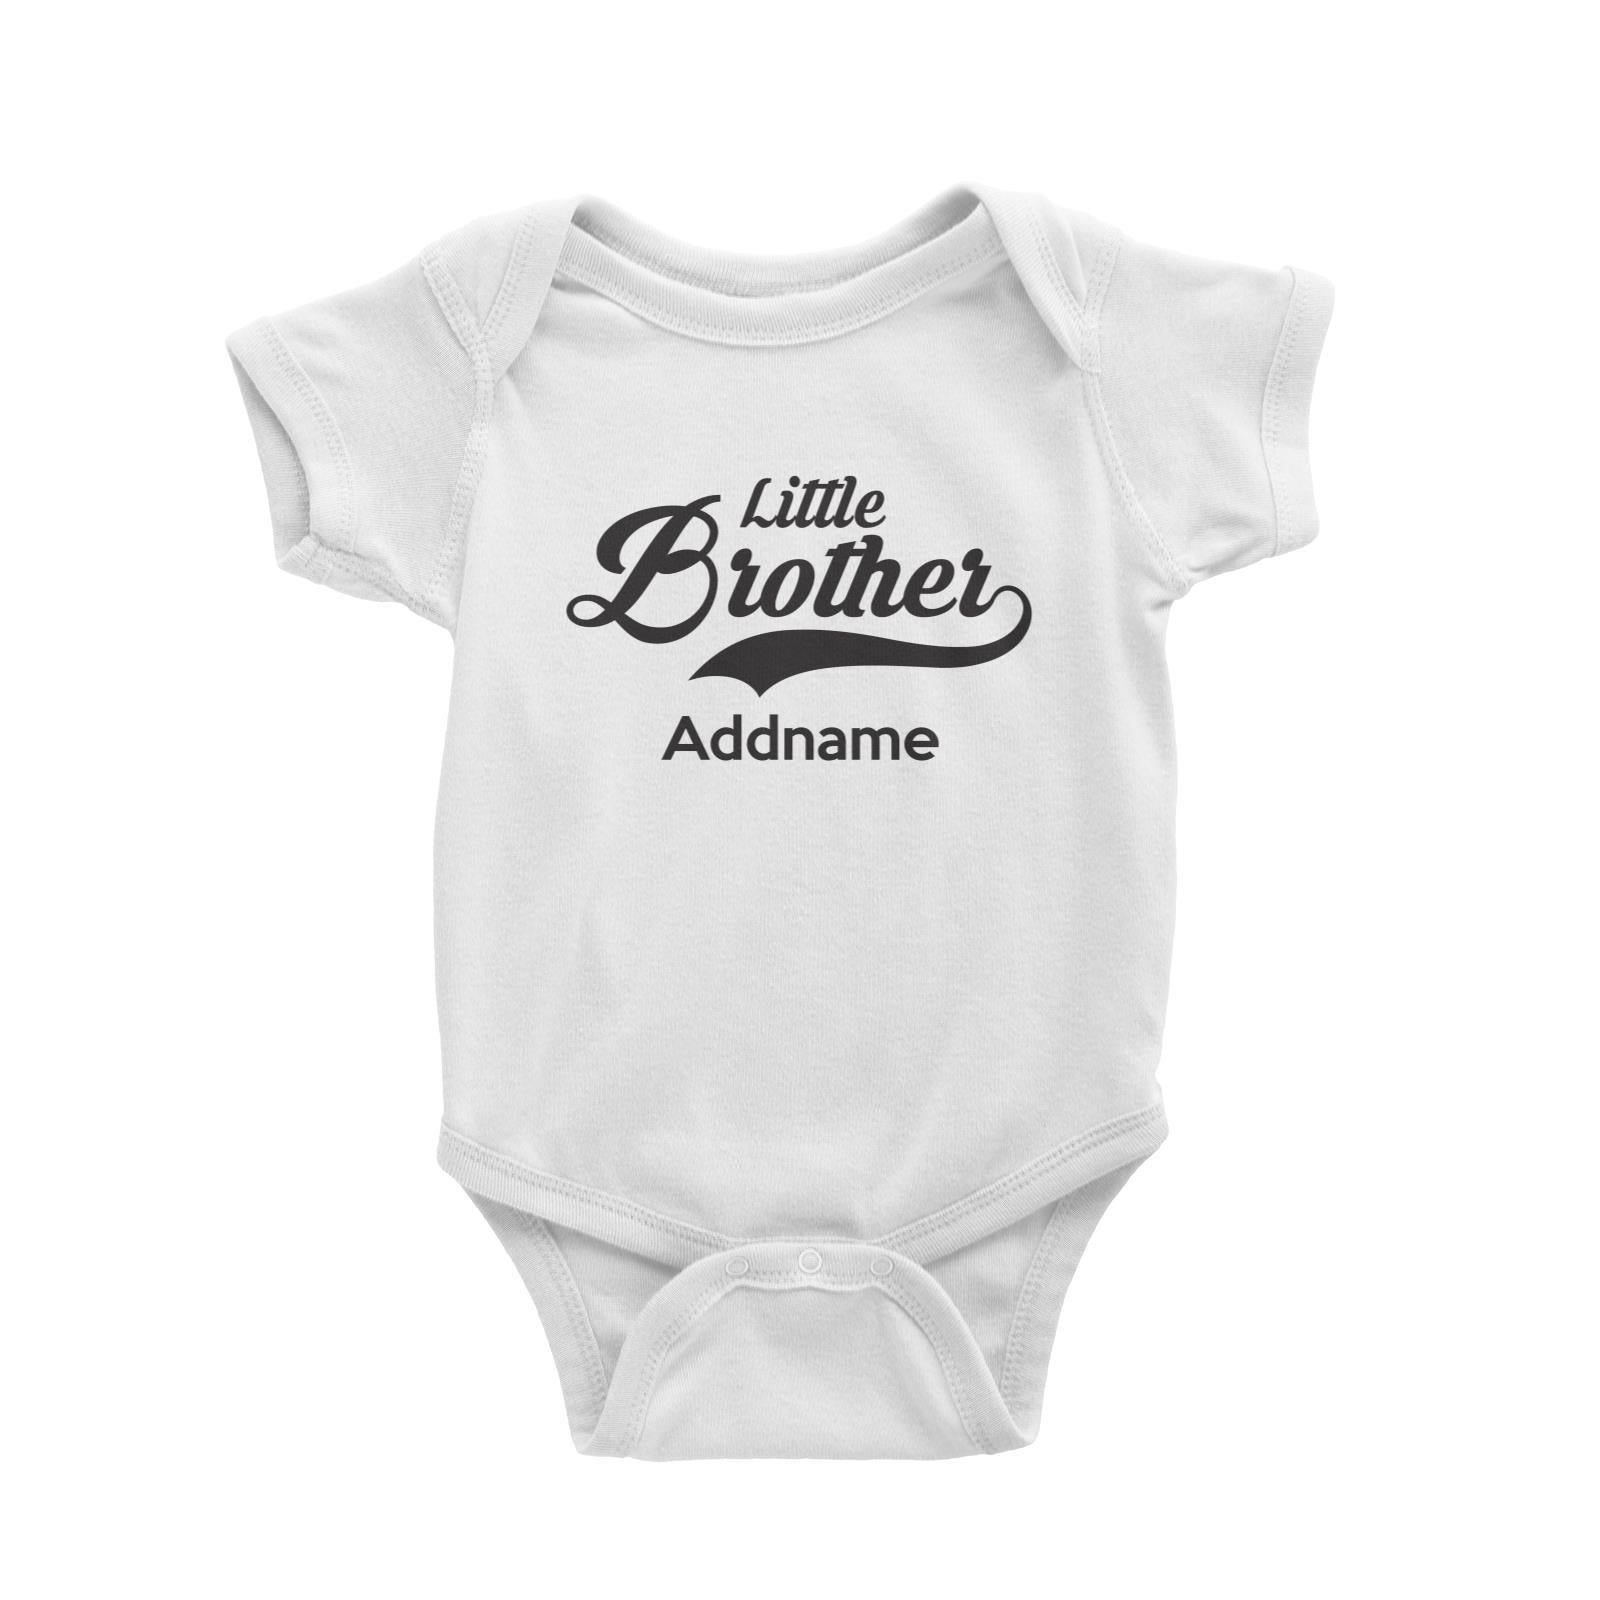 Retro Little Brother Addname Baby Romper